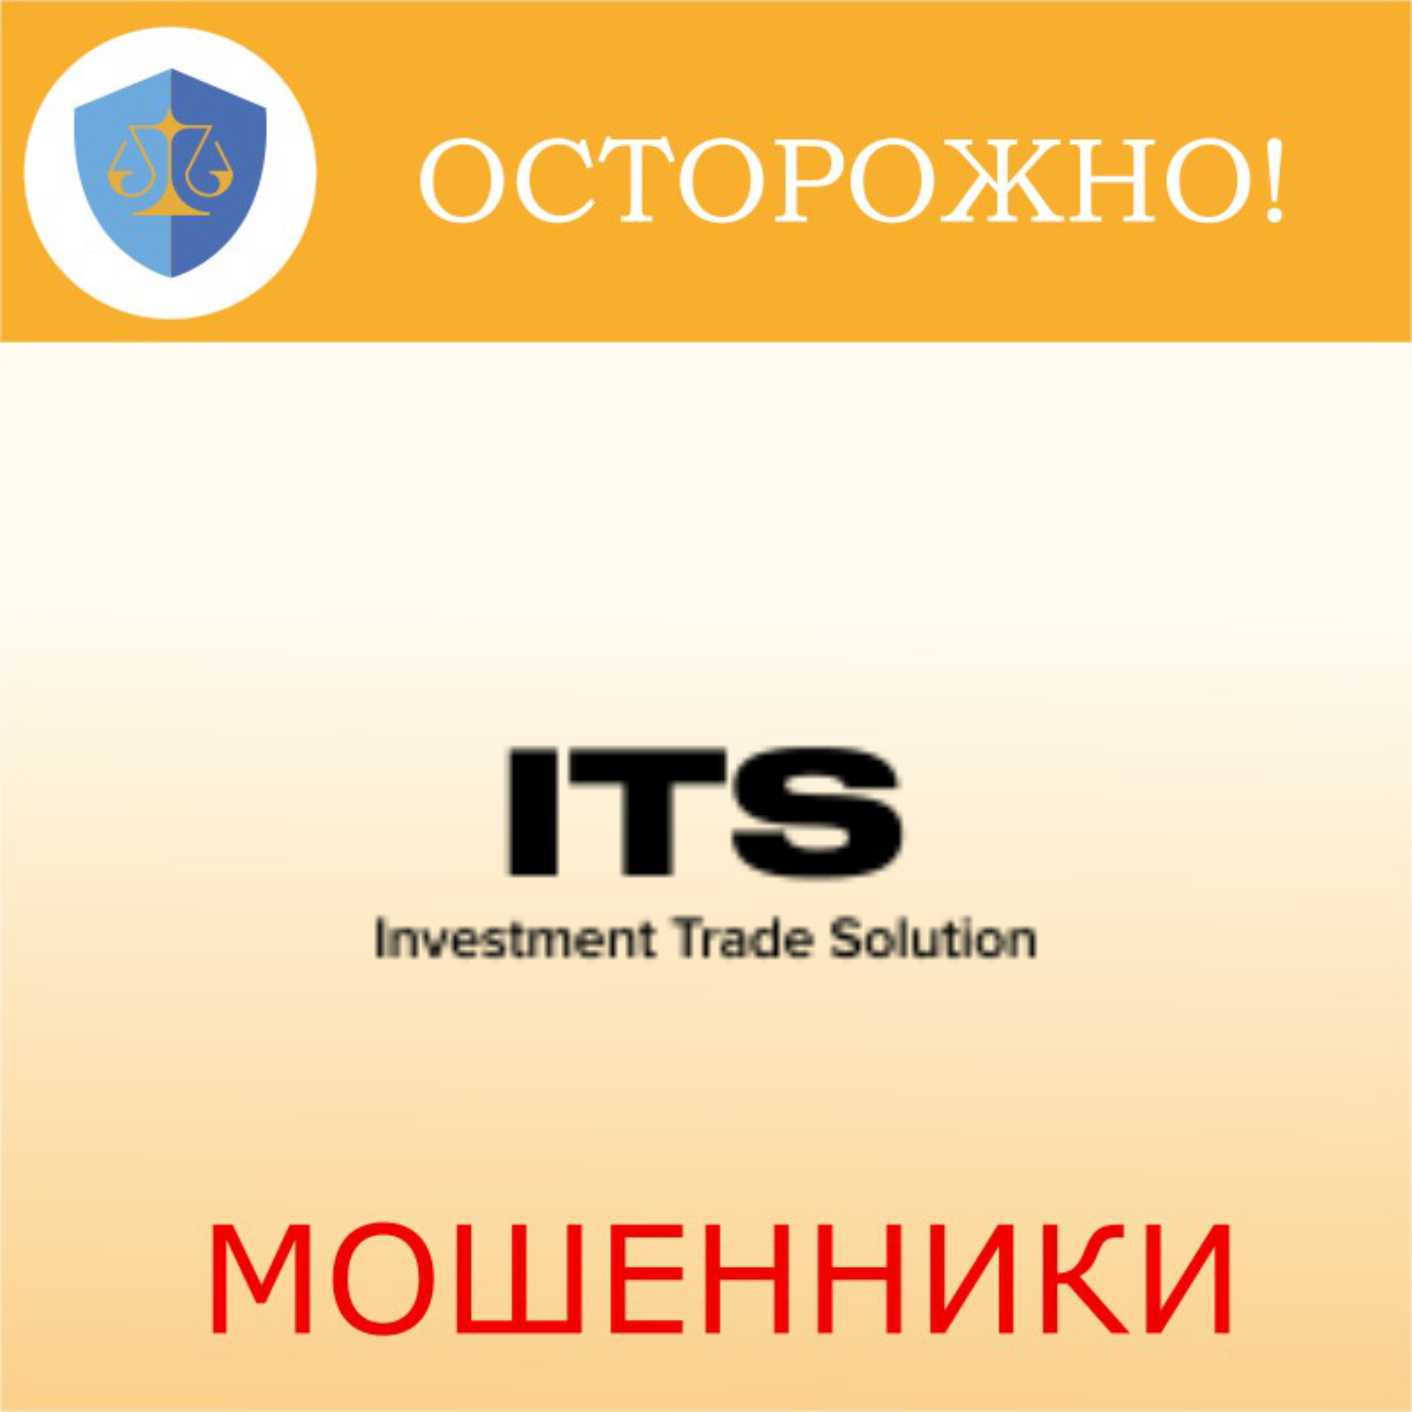 Investment Trade Solution